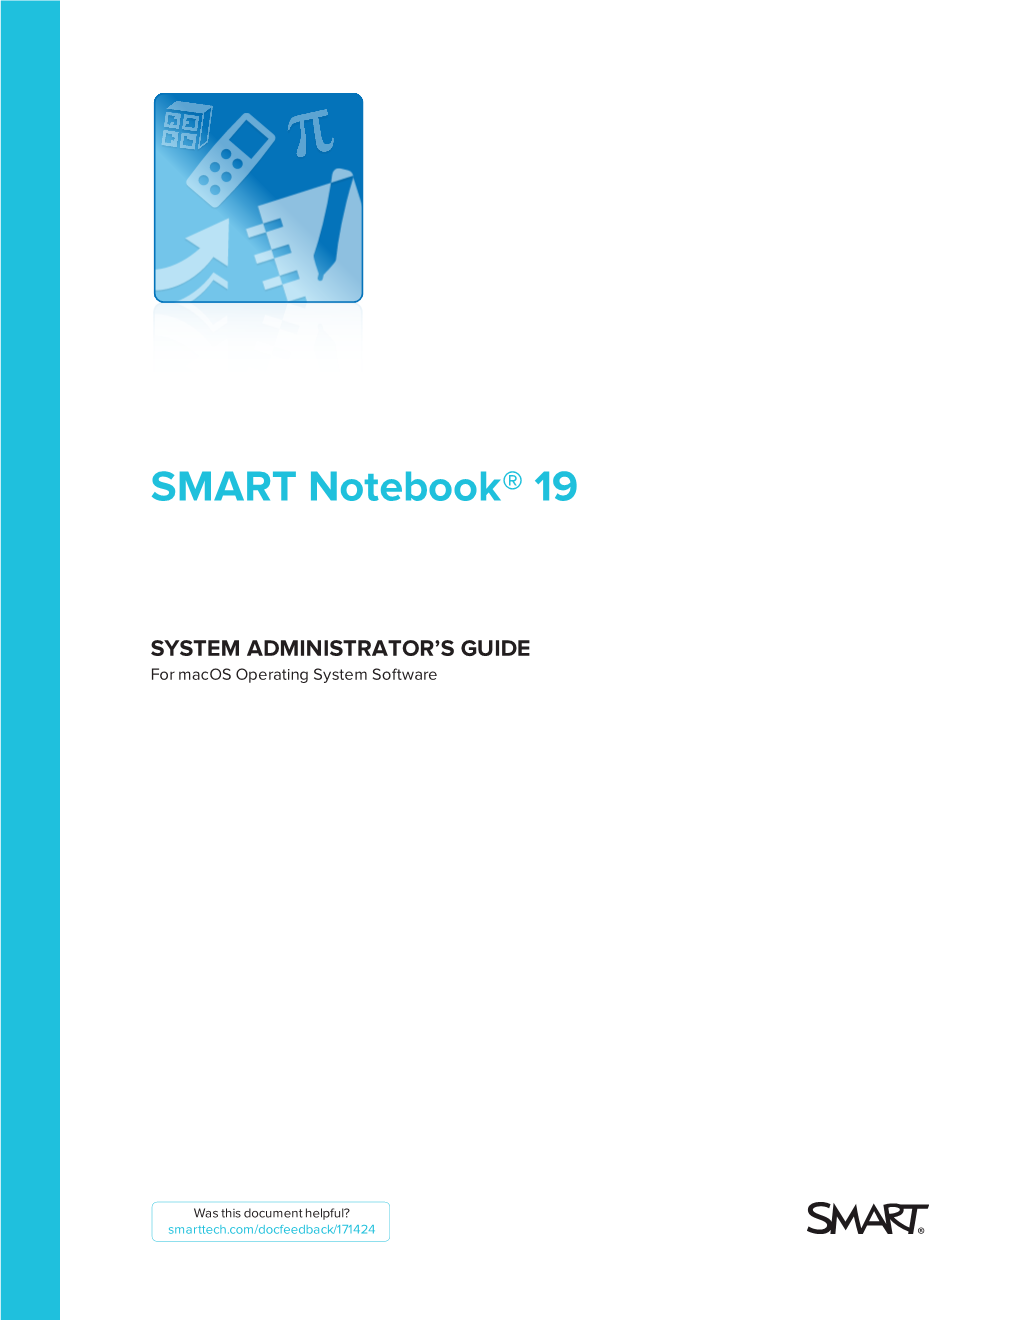 SMART Notebook 19 System Administrator's Guide for Macos